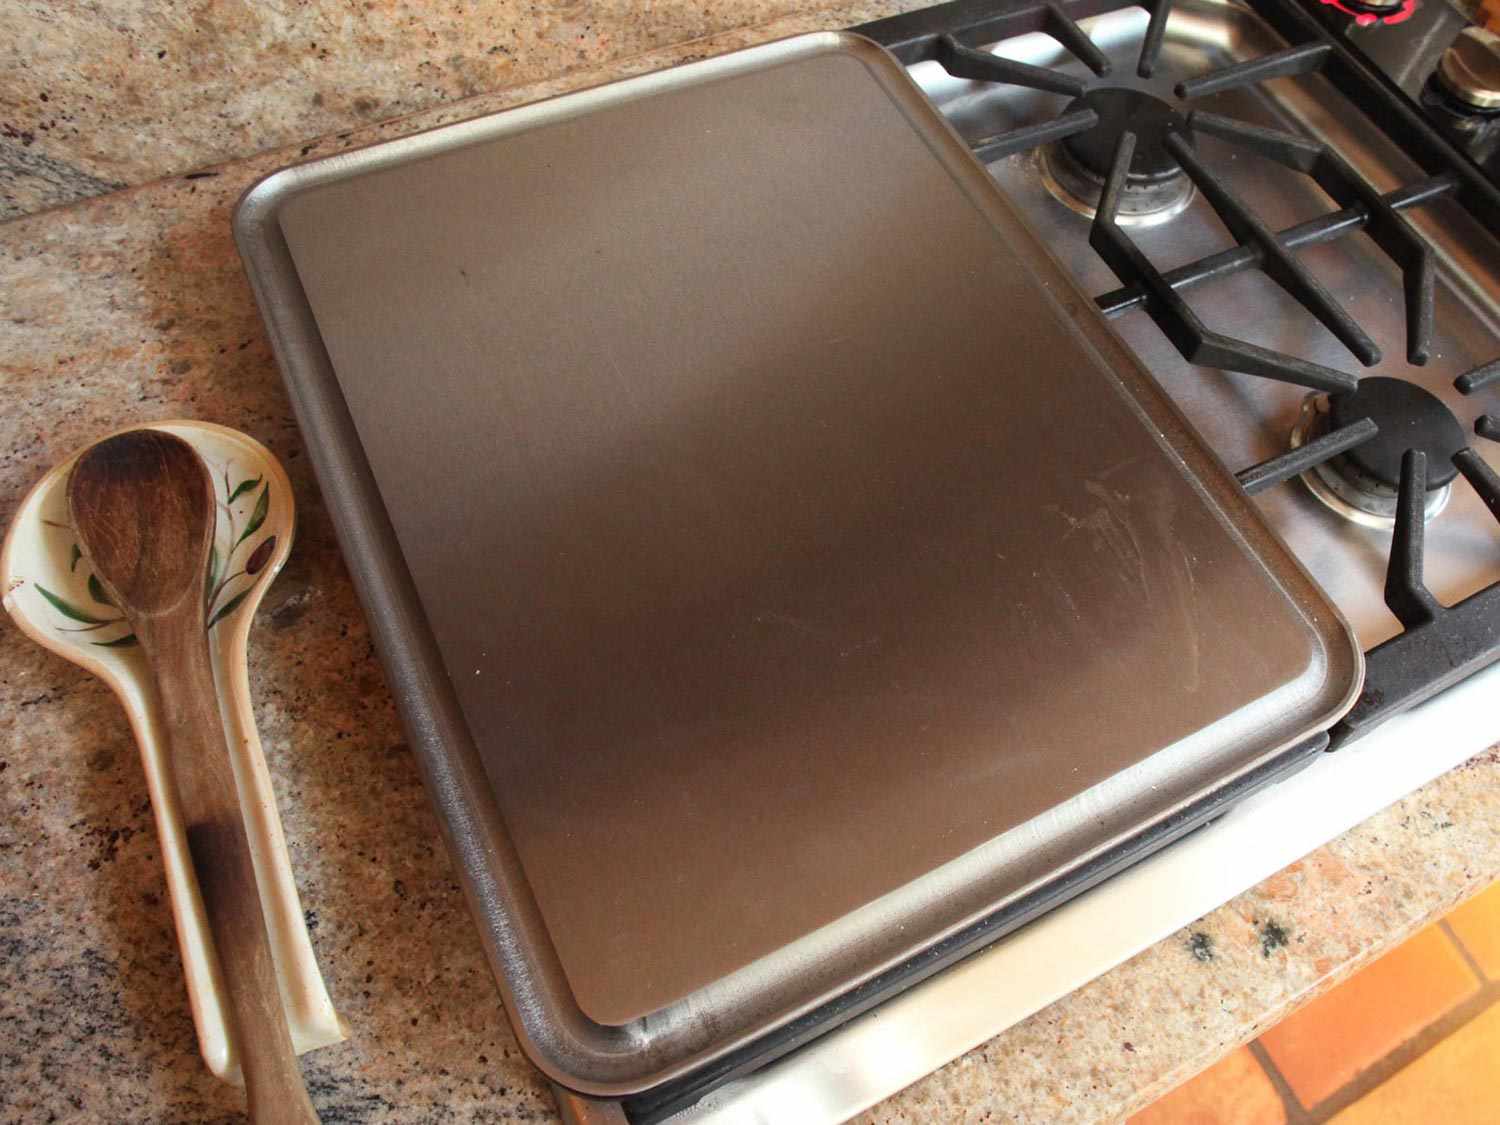 The Baking Steel Griddle on a countertop